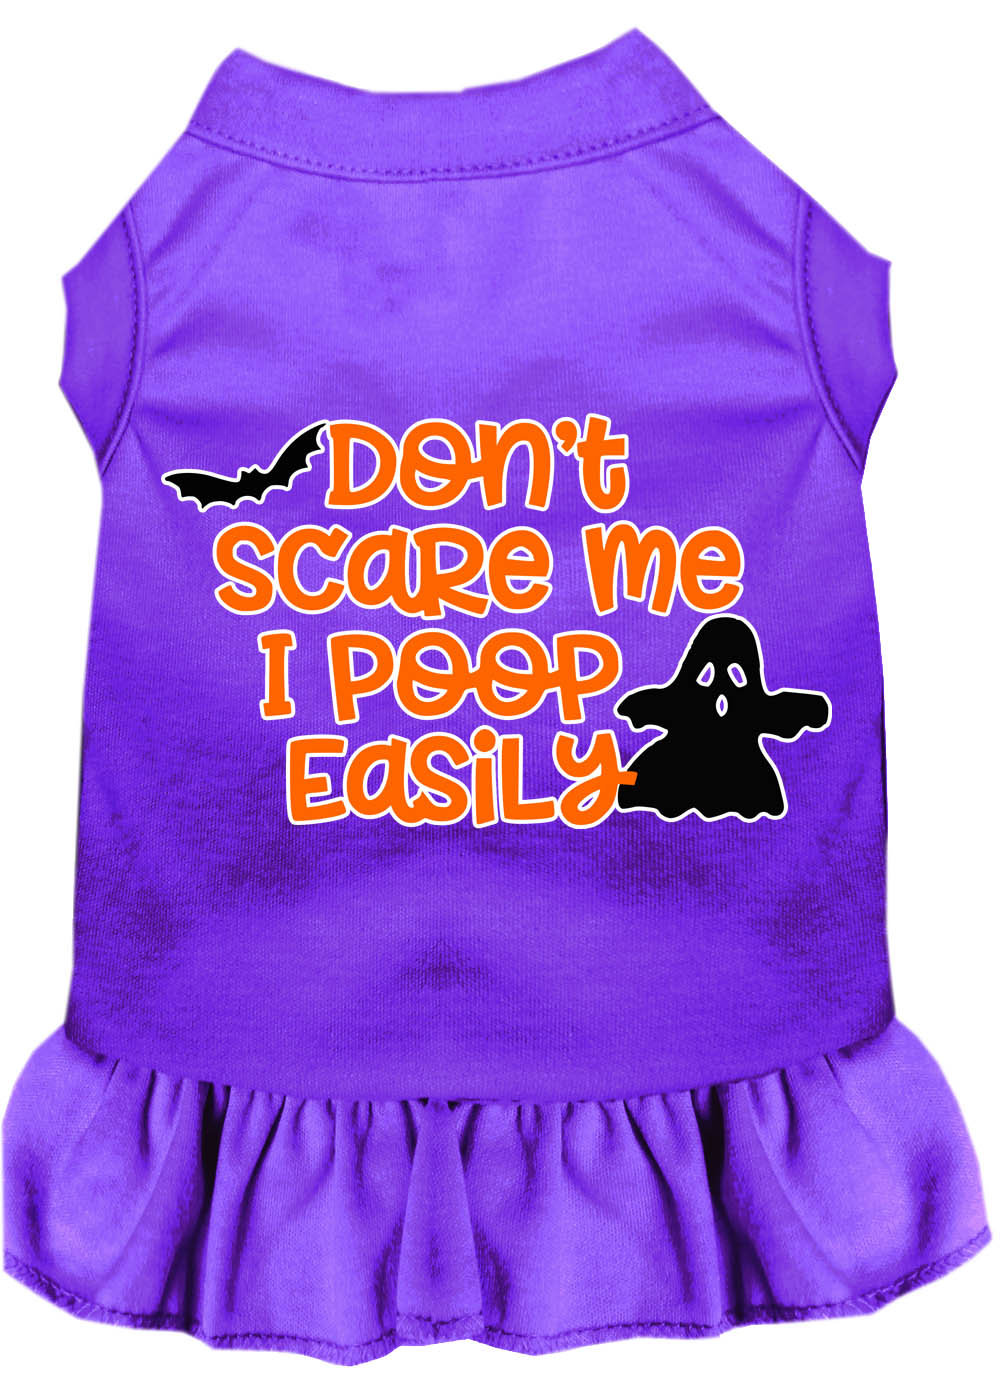 Don't Scare Me, Poops Easily Screen Print Dog Dress Purple Med